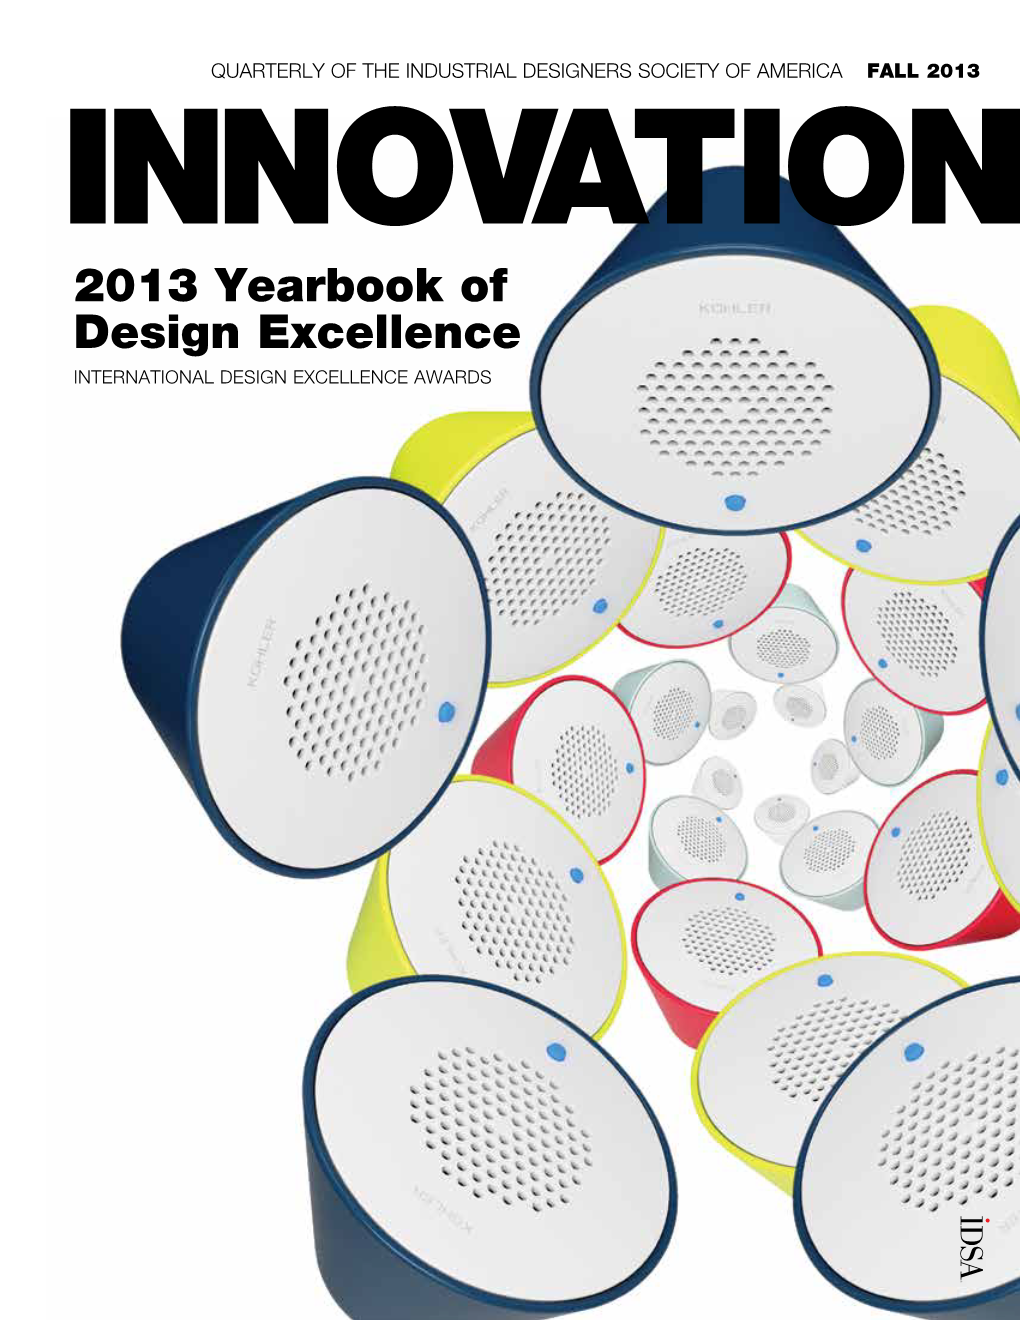 2013 Yearbook of Design Excellence